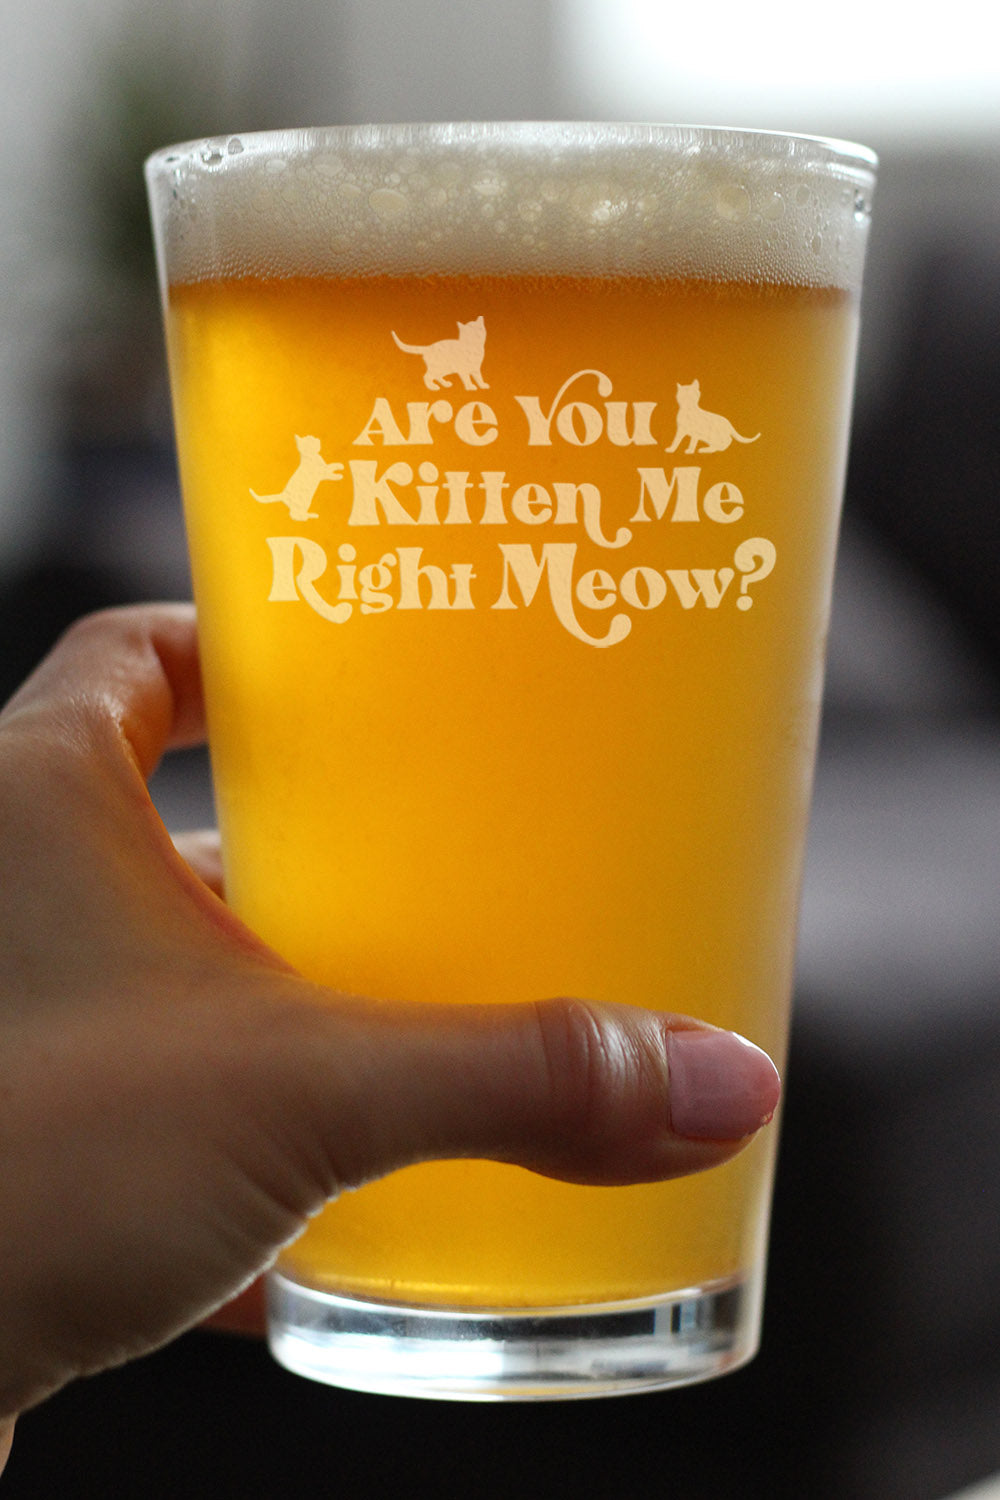 Are You Kitten Me Right Meow - 16 Ounce Pint Glass